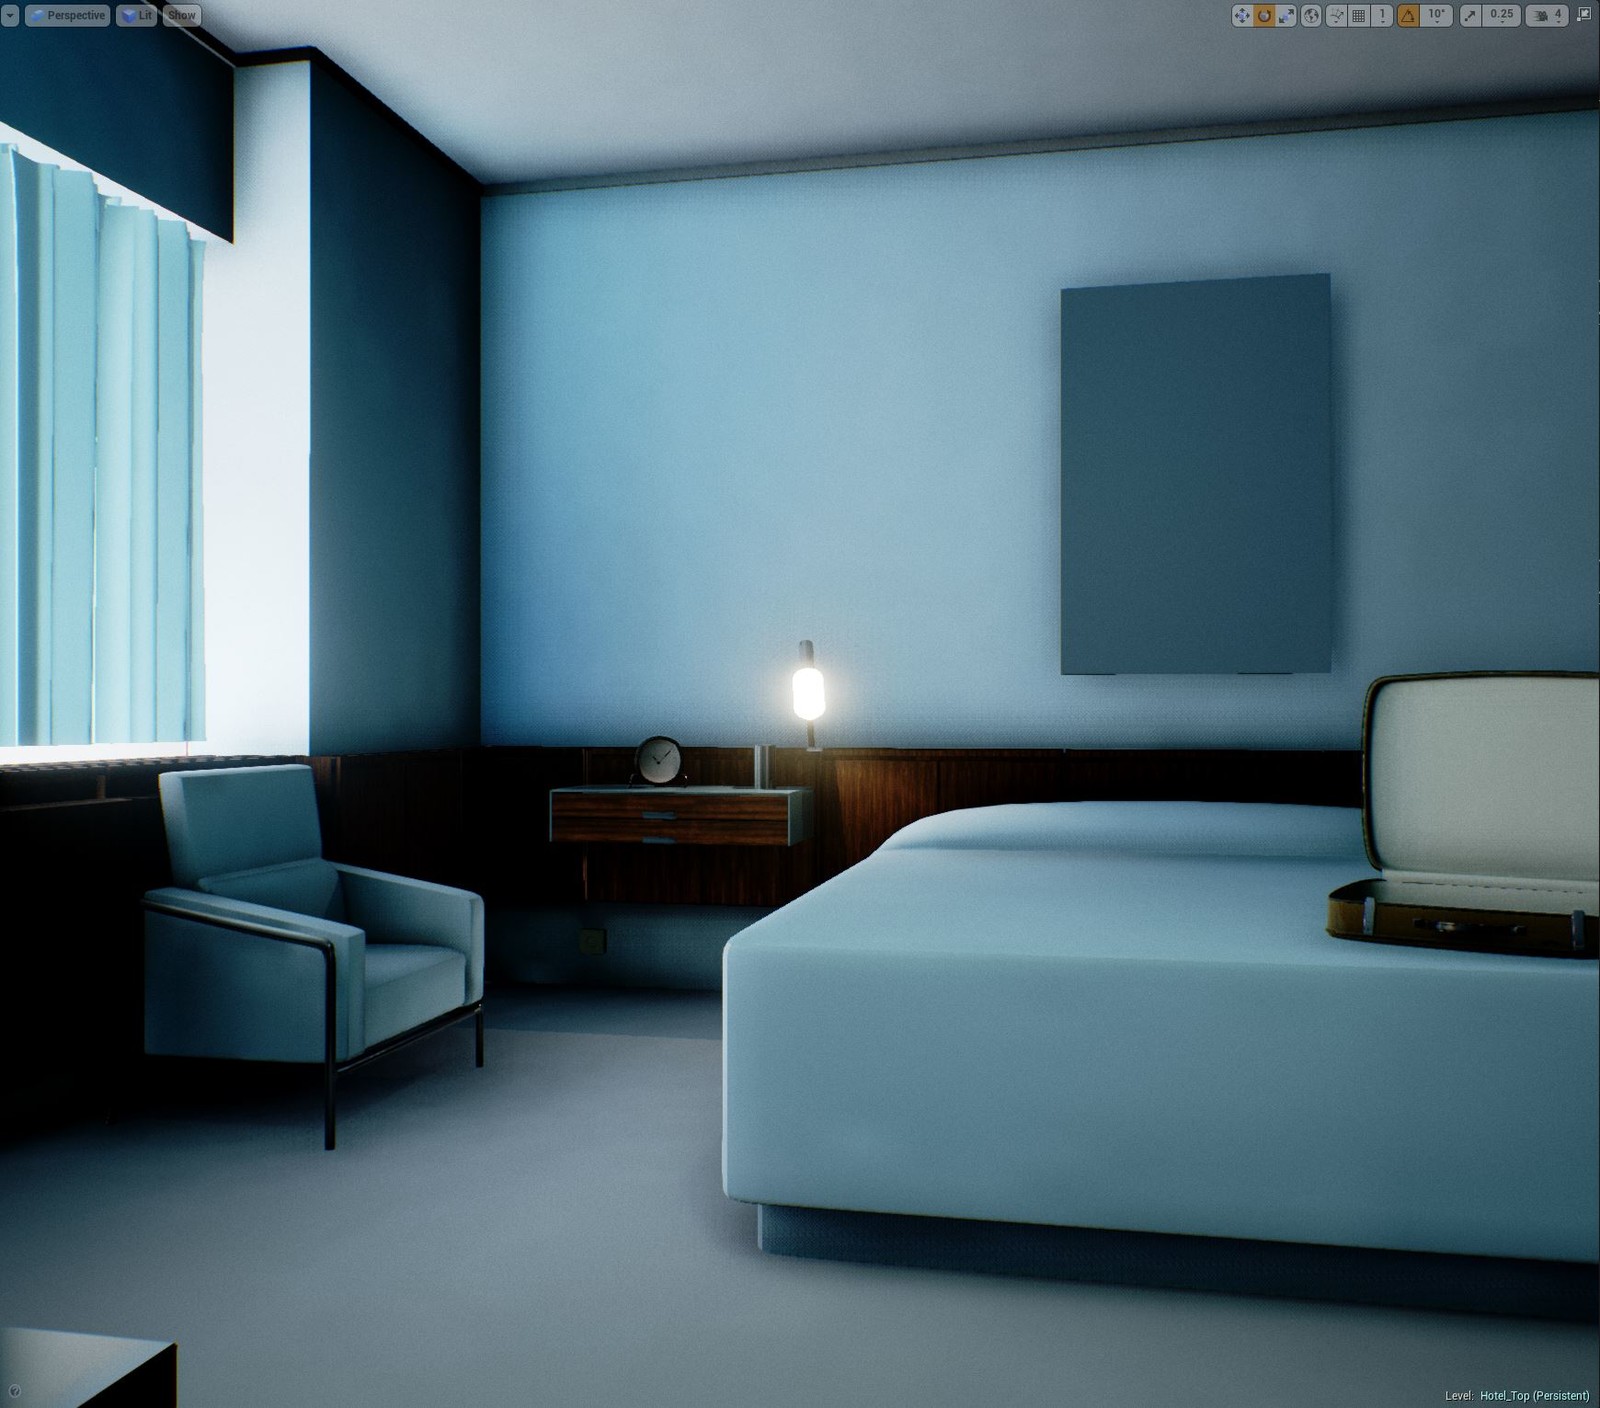 Personal Work: Unreal Engine--trying to learn some archviz seecrets.  They're still evading me but I got to study one of my favorite hotels-The Raddison Blu Royal in Copenhagen, Denmark.   Designer Arne Jacobsen is one of my favorite functional designers.